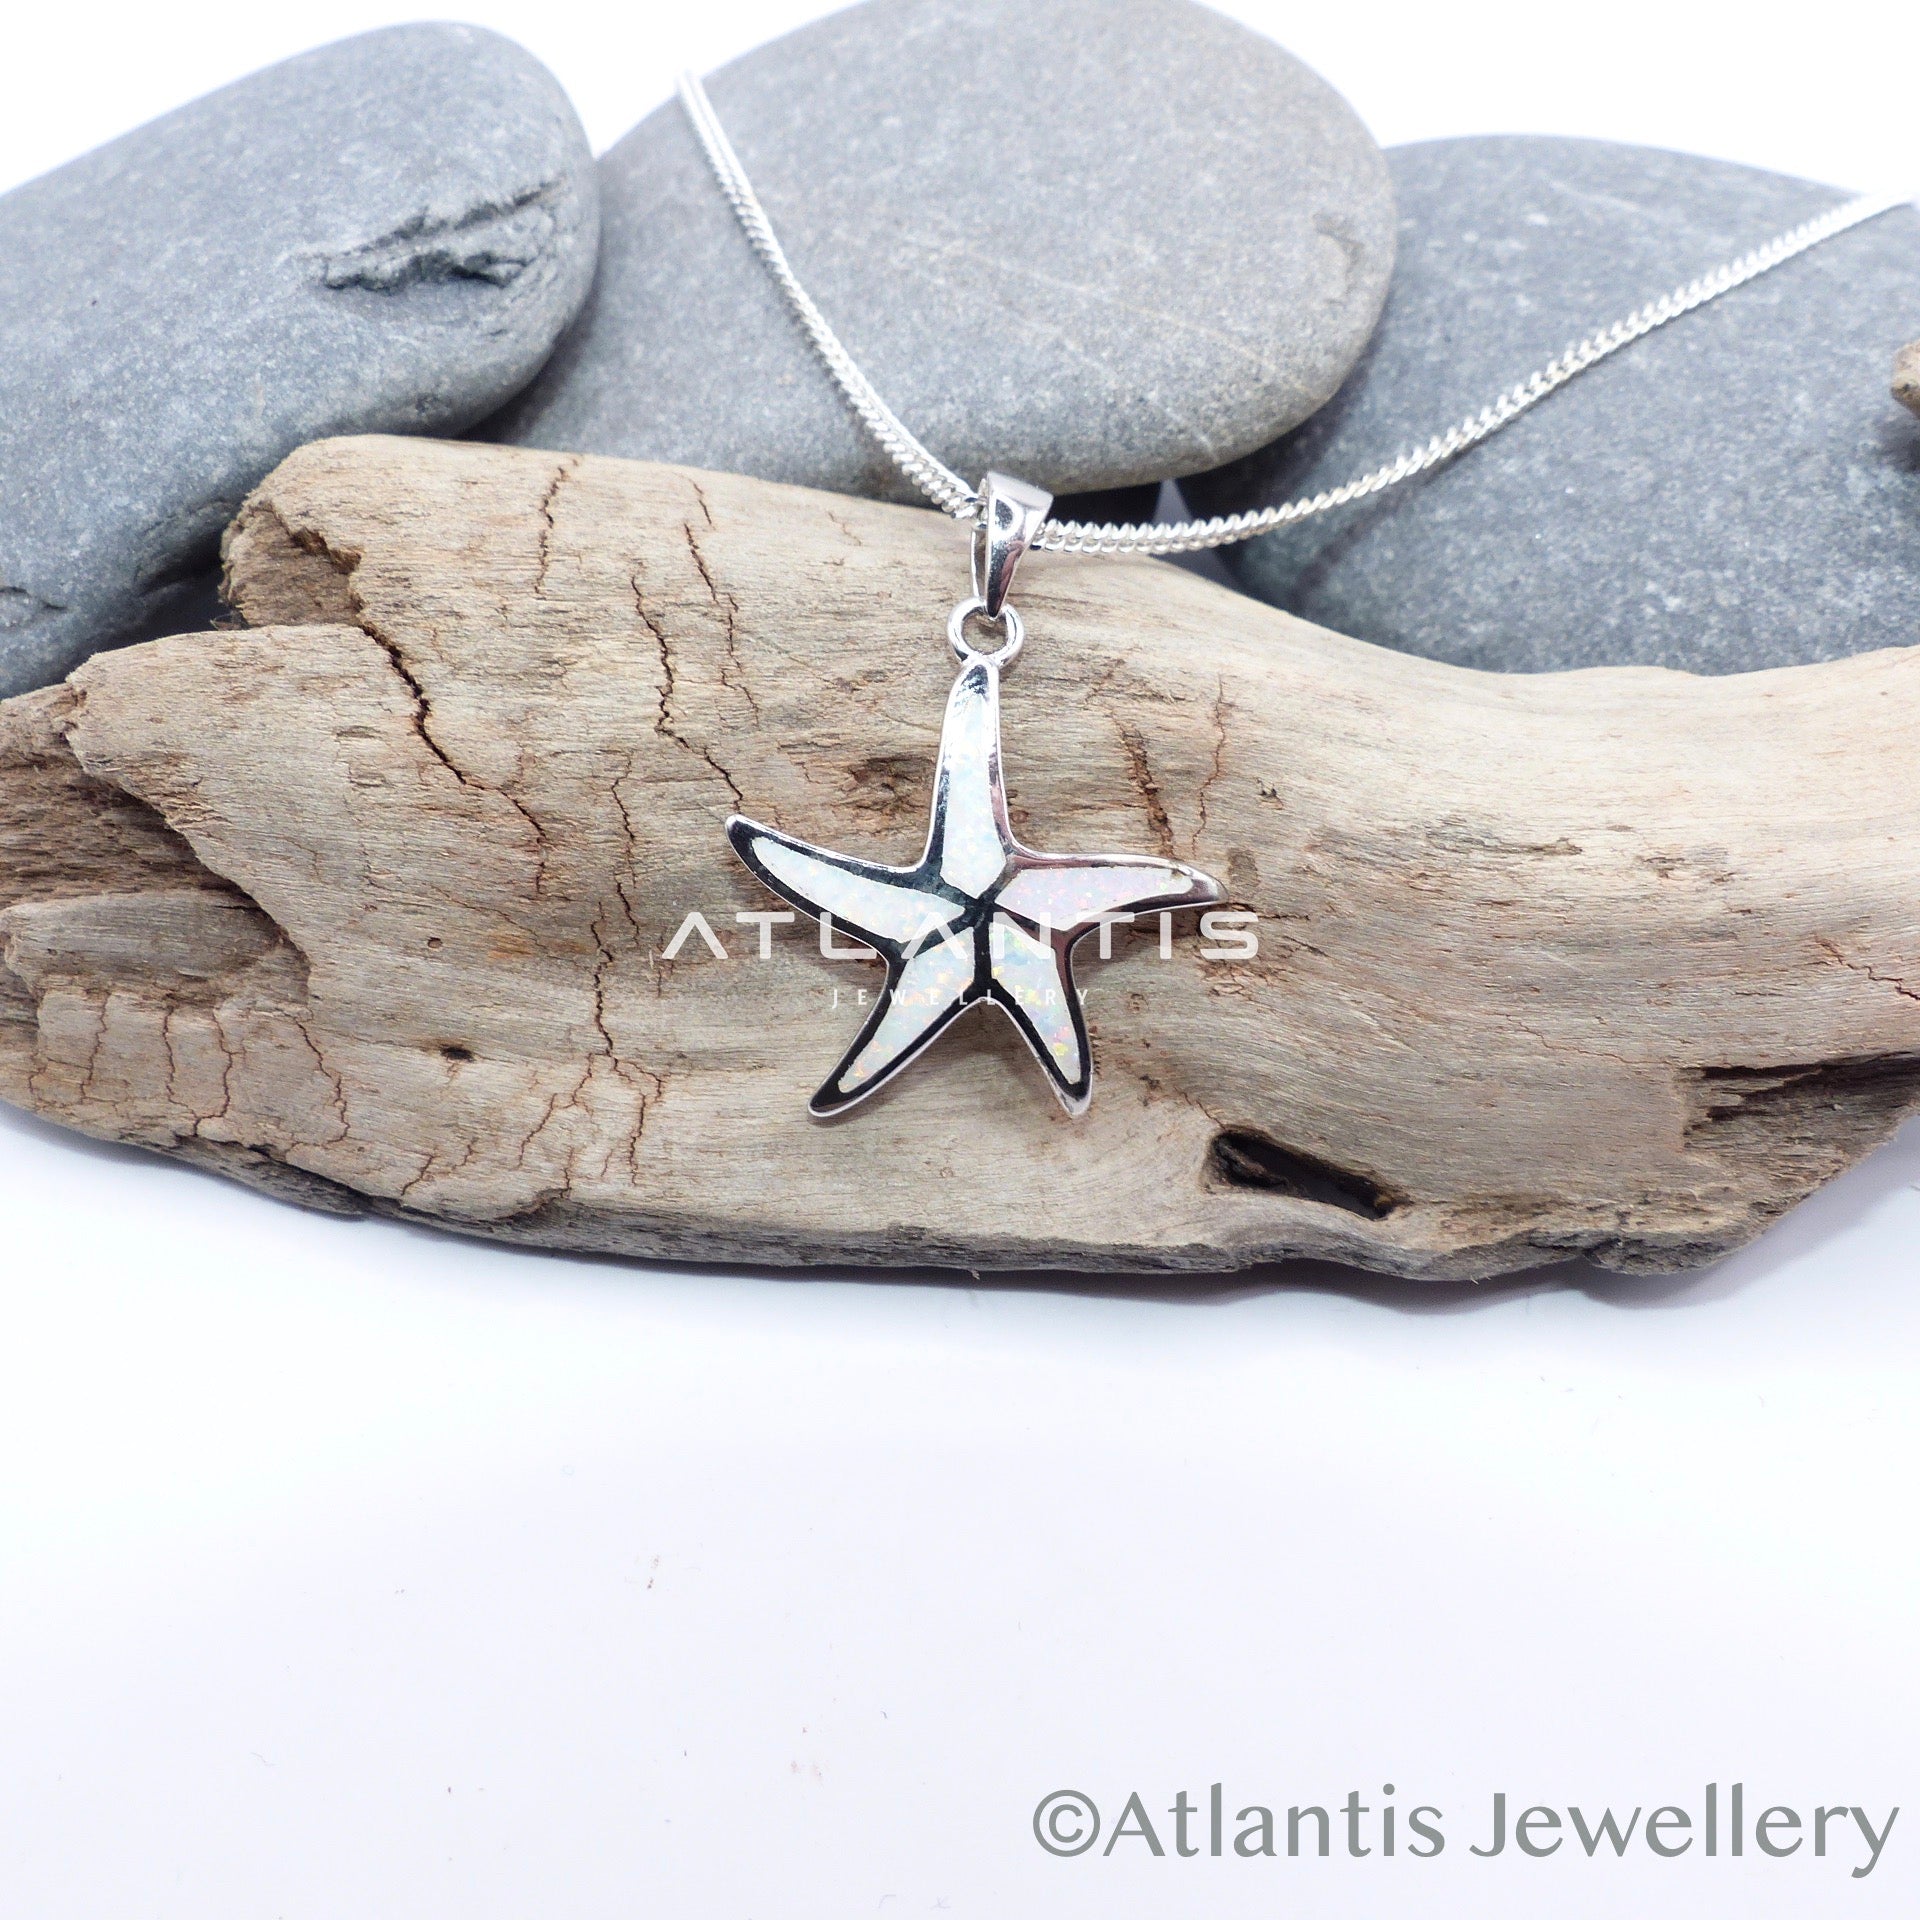 Starfish Necklace in Sterling Silver with White Opal Detailing